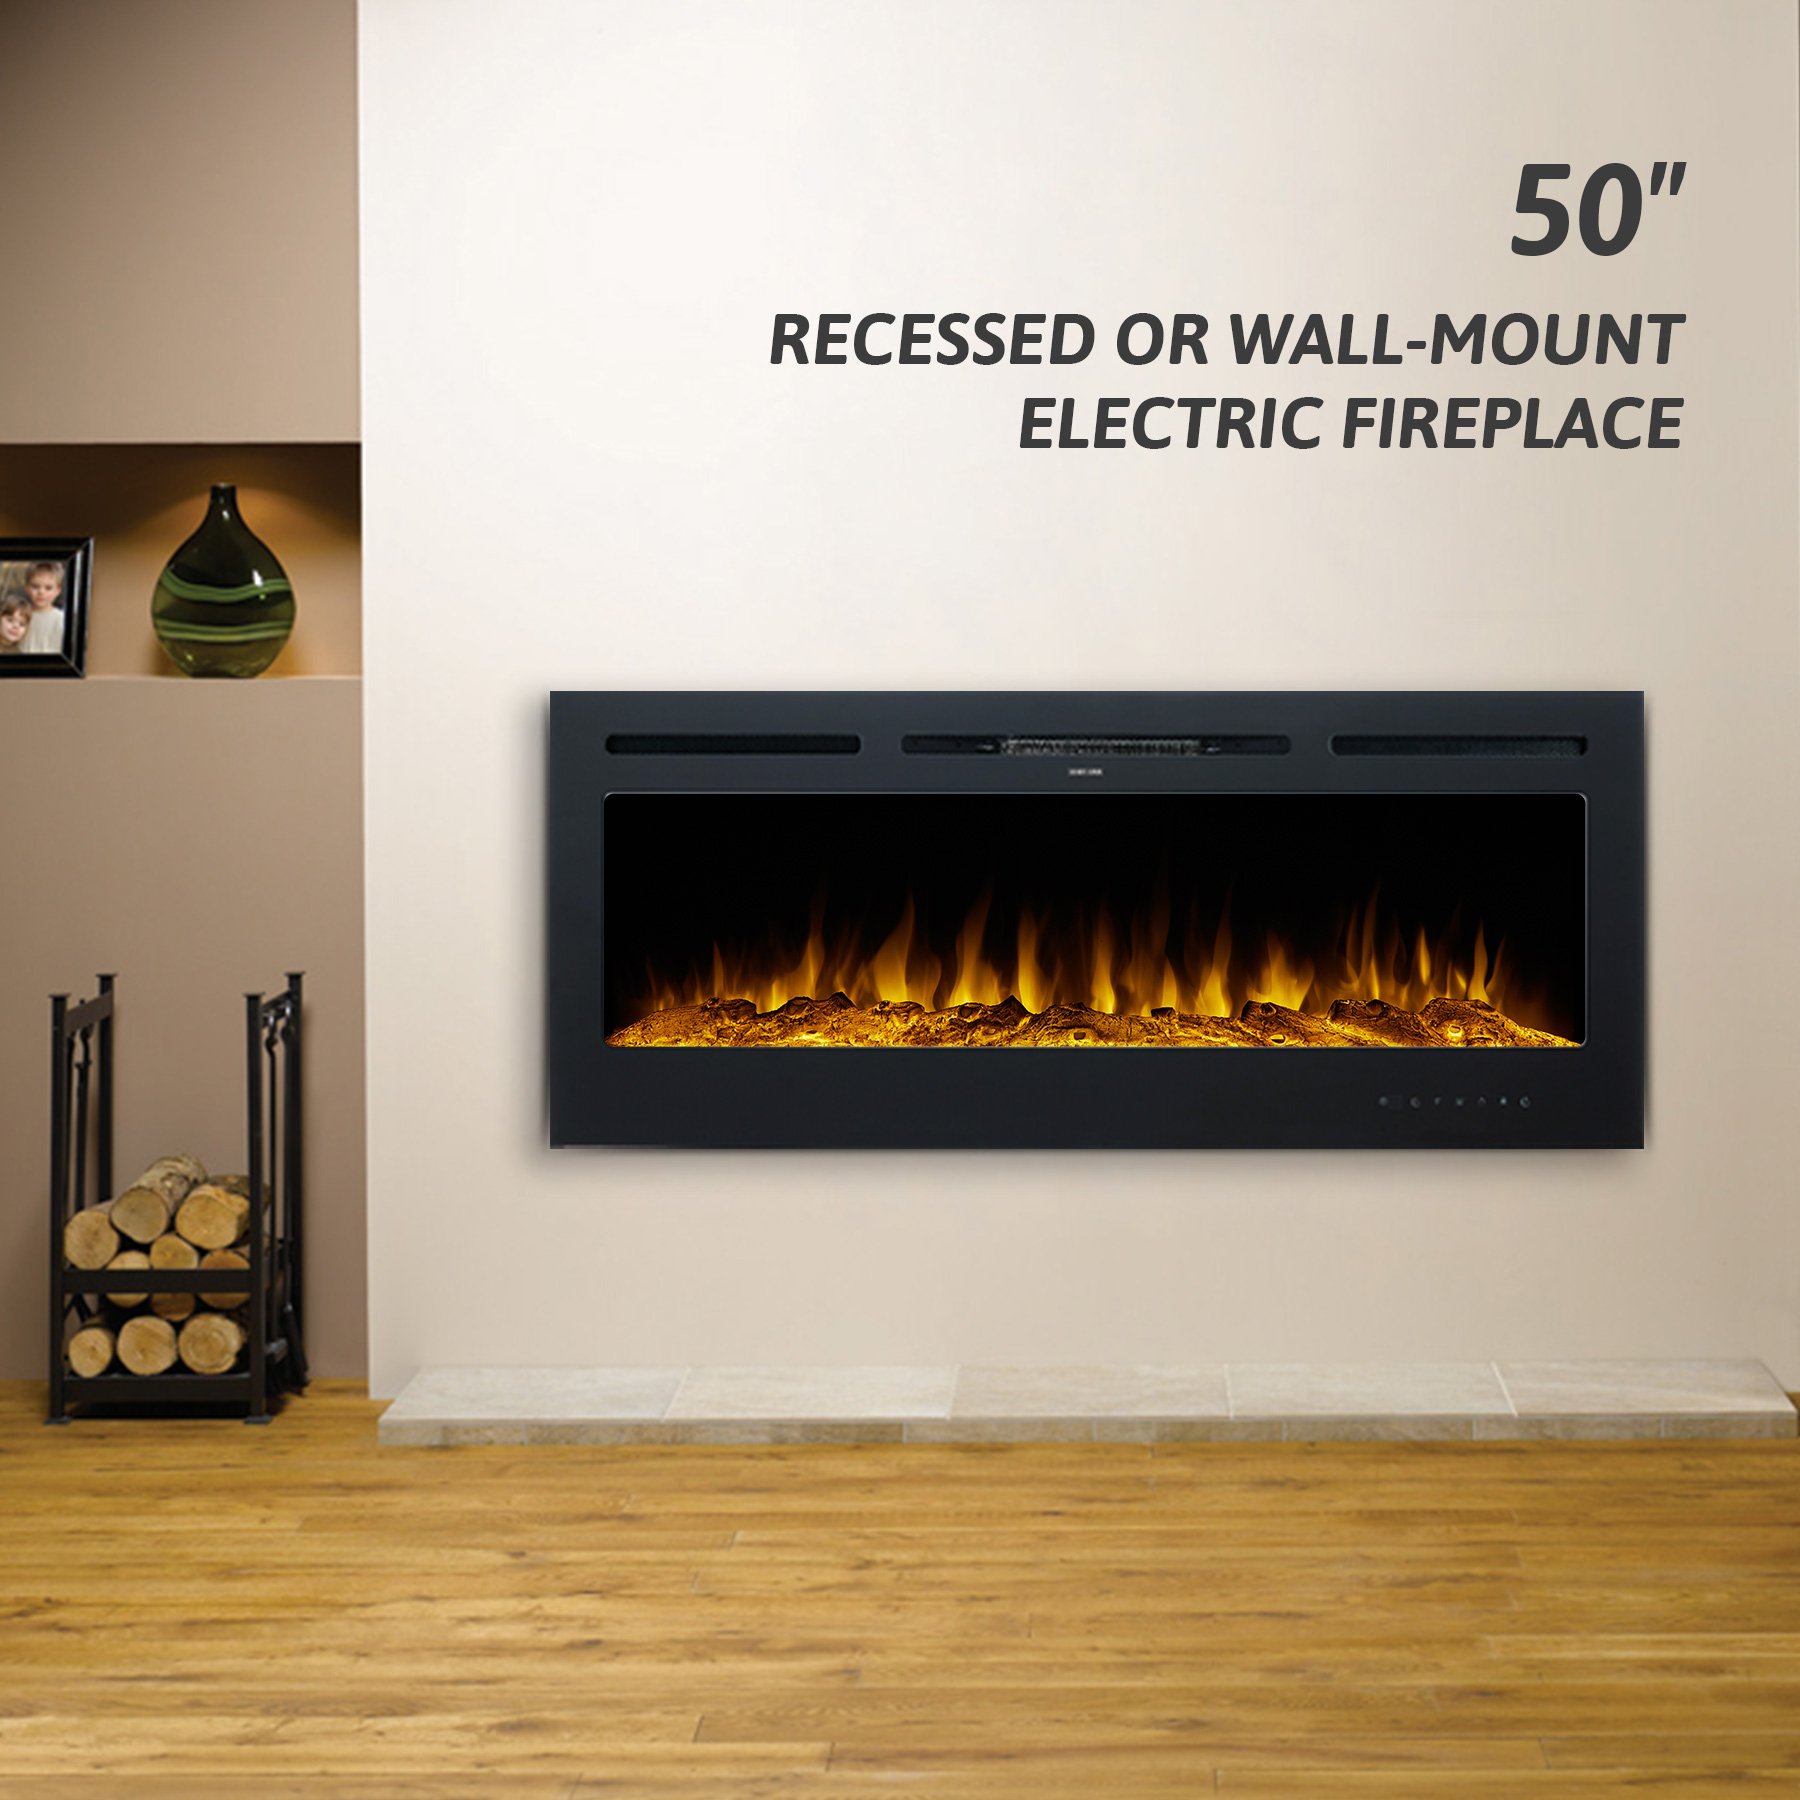 50 inch Recessed or Wall Mounted Electric Fireplace Insert with Remote Control eBay